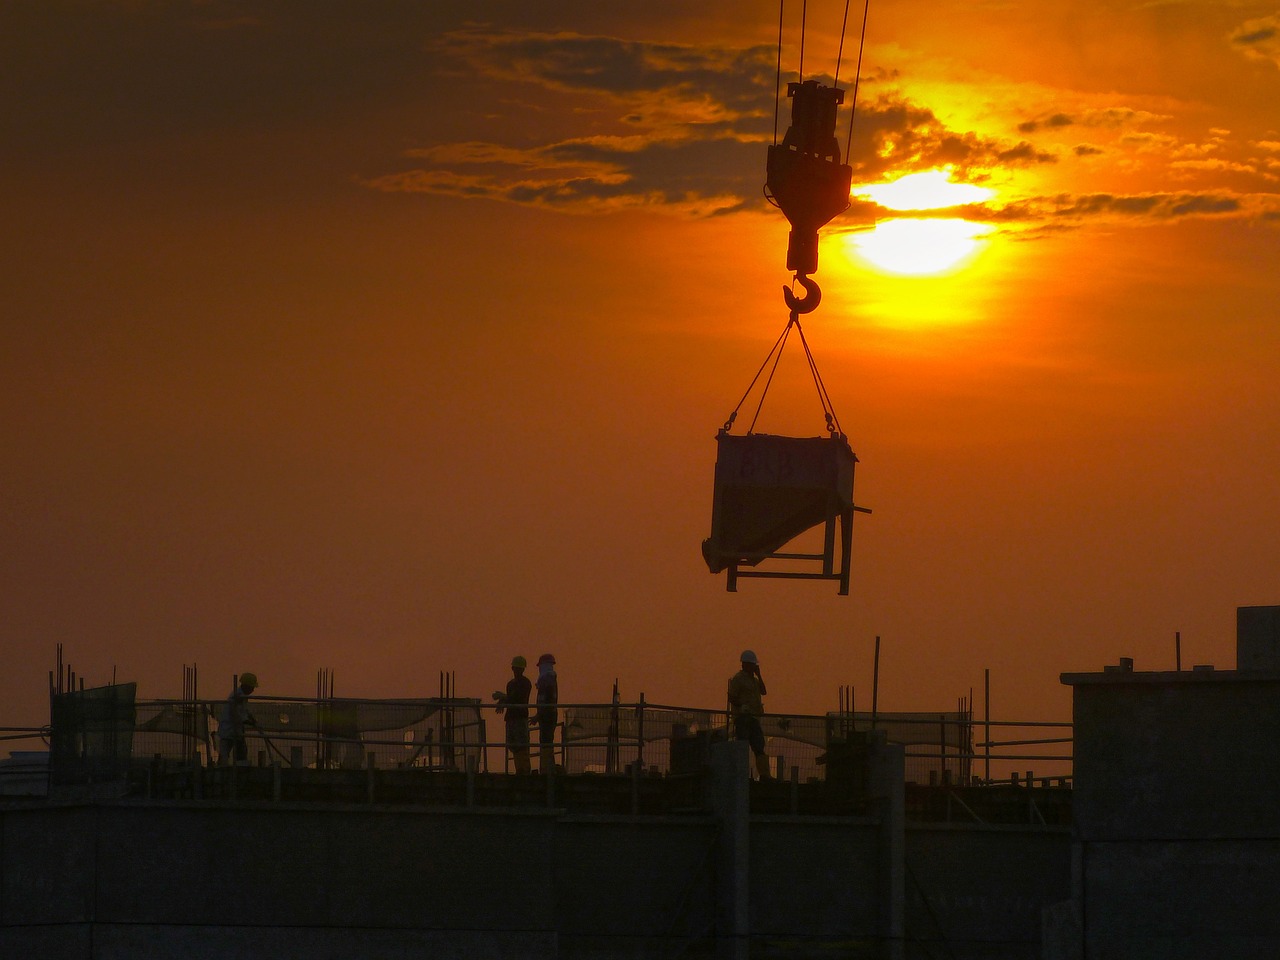 Construction crane and workers on top of in-progress building with sunset in the background